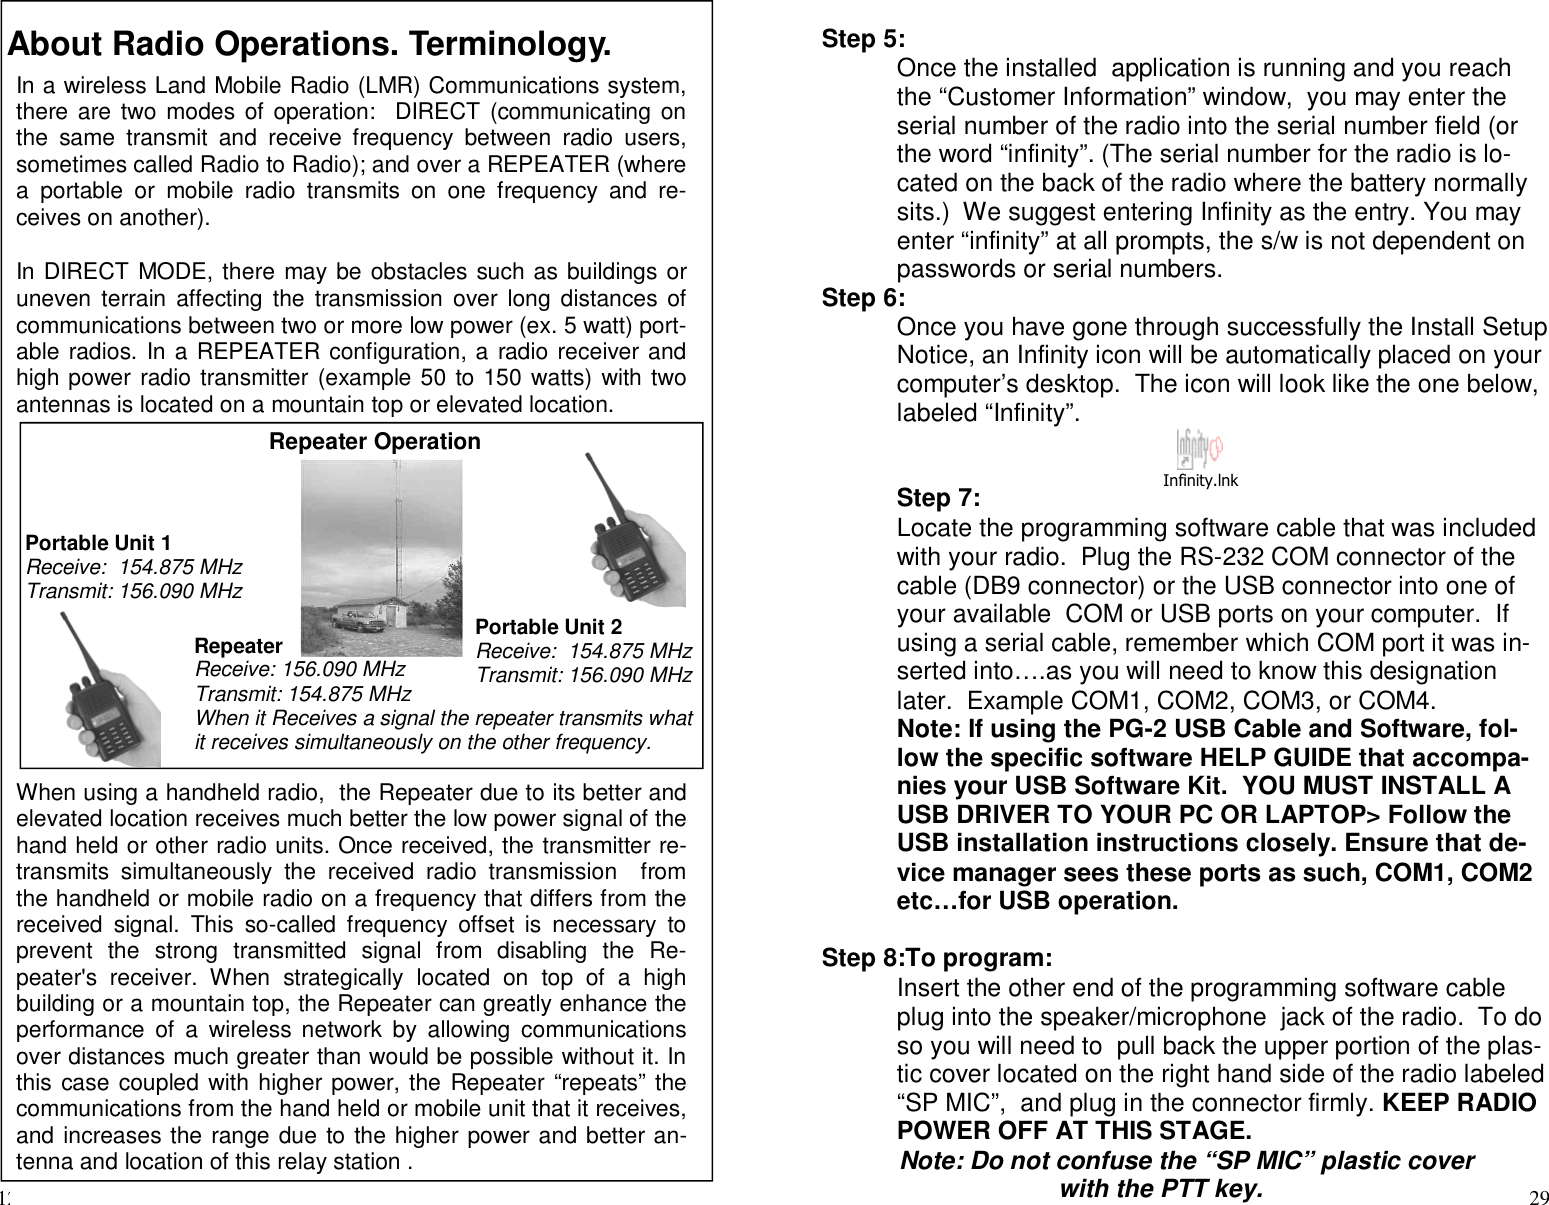 12About Radio Operations. Terminology.In a wireless Land Mobile Radio (LMR) Communications system,there are two modes of operation: DIRECT (communicating onthe same transmit and receive frequency between radio users,sometimes called Radio to Radio); and over a REPEATER (wherea portable or mobile radio transmits on one frequency and re-ceives on another).In DIRECT MODE, there may be obstacles such as buildings oruneven terrain affecting the transmission over long distances ofcommunications between two or more low power (ex. 5 watt) port-able radios. In a REPEATER configuration, a radio receiver andhigh power radio transmitter (example 50 to 150 watts) with twoantennas is located on a mountain top or elevated location.When using a handheld radio, the Repeater due to its better andelevated location receives much better the low power signal of thehand held or other radio units. Once received, the transmitter re-transmits simultaneously the received radio transmission fromthe handheld or mobile radio on a frequency that differs from thereceived signal. This so-called frequency offset is necessary toprevent the strong transmitted signal from disabling the Re-peater&apos;s receiver. When strategically located on top of a highbuilding or a mountain top, the Repeater can greatly enhance theperformance of a wireless network by allowing communicationsover distances much greater than would be possible without it. Inthis case coupled with higher power, the Repeater “repeats” thecommunications from the hand held or mobile unit that it receives,and increases the range due to the higher power and better an-tenna and location of this relay station .Repeater OperationPortable Unit 1Receive: 154.875 MHzTransmit: 156.090 MHzRepeaterReceive: 156.090 MHzTransmit: 154.875 MHzWhen it Receives a signal the repeater transmits whatit receives simultaneously on the other frequency.Portable Unit 2Receive: 154.875 MHzTransmit: 156.090 MHz29Step 5:Once the installed application is running and you reachthe “Customer Information” window, you may enter theserial number of the radio into the serial number field (orthe word “infinity”. (The serial number for the radio is lo-cated on the back of the radio where the battery normallysits.) We suggest entering Infinity as the entry. You mayenter “infinity” at all prompts, the s/w is not dependent onpasswords or serial numbers.Step 6:Once you have gone through successfully the Install SetupNotice, an Infinity icon will be automatically placed on yourcomputer’s desktop. The icon will look like the one below,labeled “Infinity”.Step 7:Locate the programming software cable that was includedwith your radio. Plug the RS-232 COM connector of thecable (DB9 connector) or the USB connector into one ofyour available COM or USB ports on your computer. Ifusing a serial cable, remember which COM port it was in-serted into….as you will need to know this designationlater. Example COM1, COM2, COM3, or COM4.Note: If using the PG-2 USB Cable and Software, fol-low the specific software HELP GUIDE that accompa-nies your USB Software Kit. YOU MUST INSTALL AUSB DRIVER TO YOUR PC OR LAPTOP&gt; Follow theUSB installation instructions closely. Ensure that de-vice manager sees these ports as such, COM1, COM2etc…for USB operation.Step 8:To program:Insert the other end of the programming software cableplug into the speaker/microphone jack of the radio. To doso you will need to pull back the upper portion of the plas-tic cover located on the right hand side of the radio labeled“SP MIC”, and plug in the connector firmly. KEEP RADIOPOWER OFF AT THIS STAGE.Note: Do not confuse the “SP MIC” plastic coverwith the PTT key.Infinity.lnk